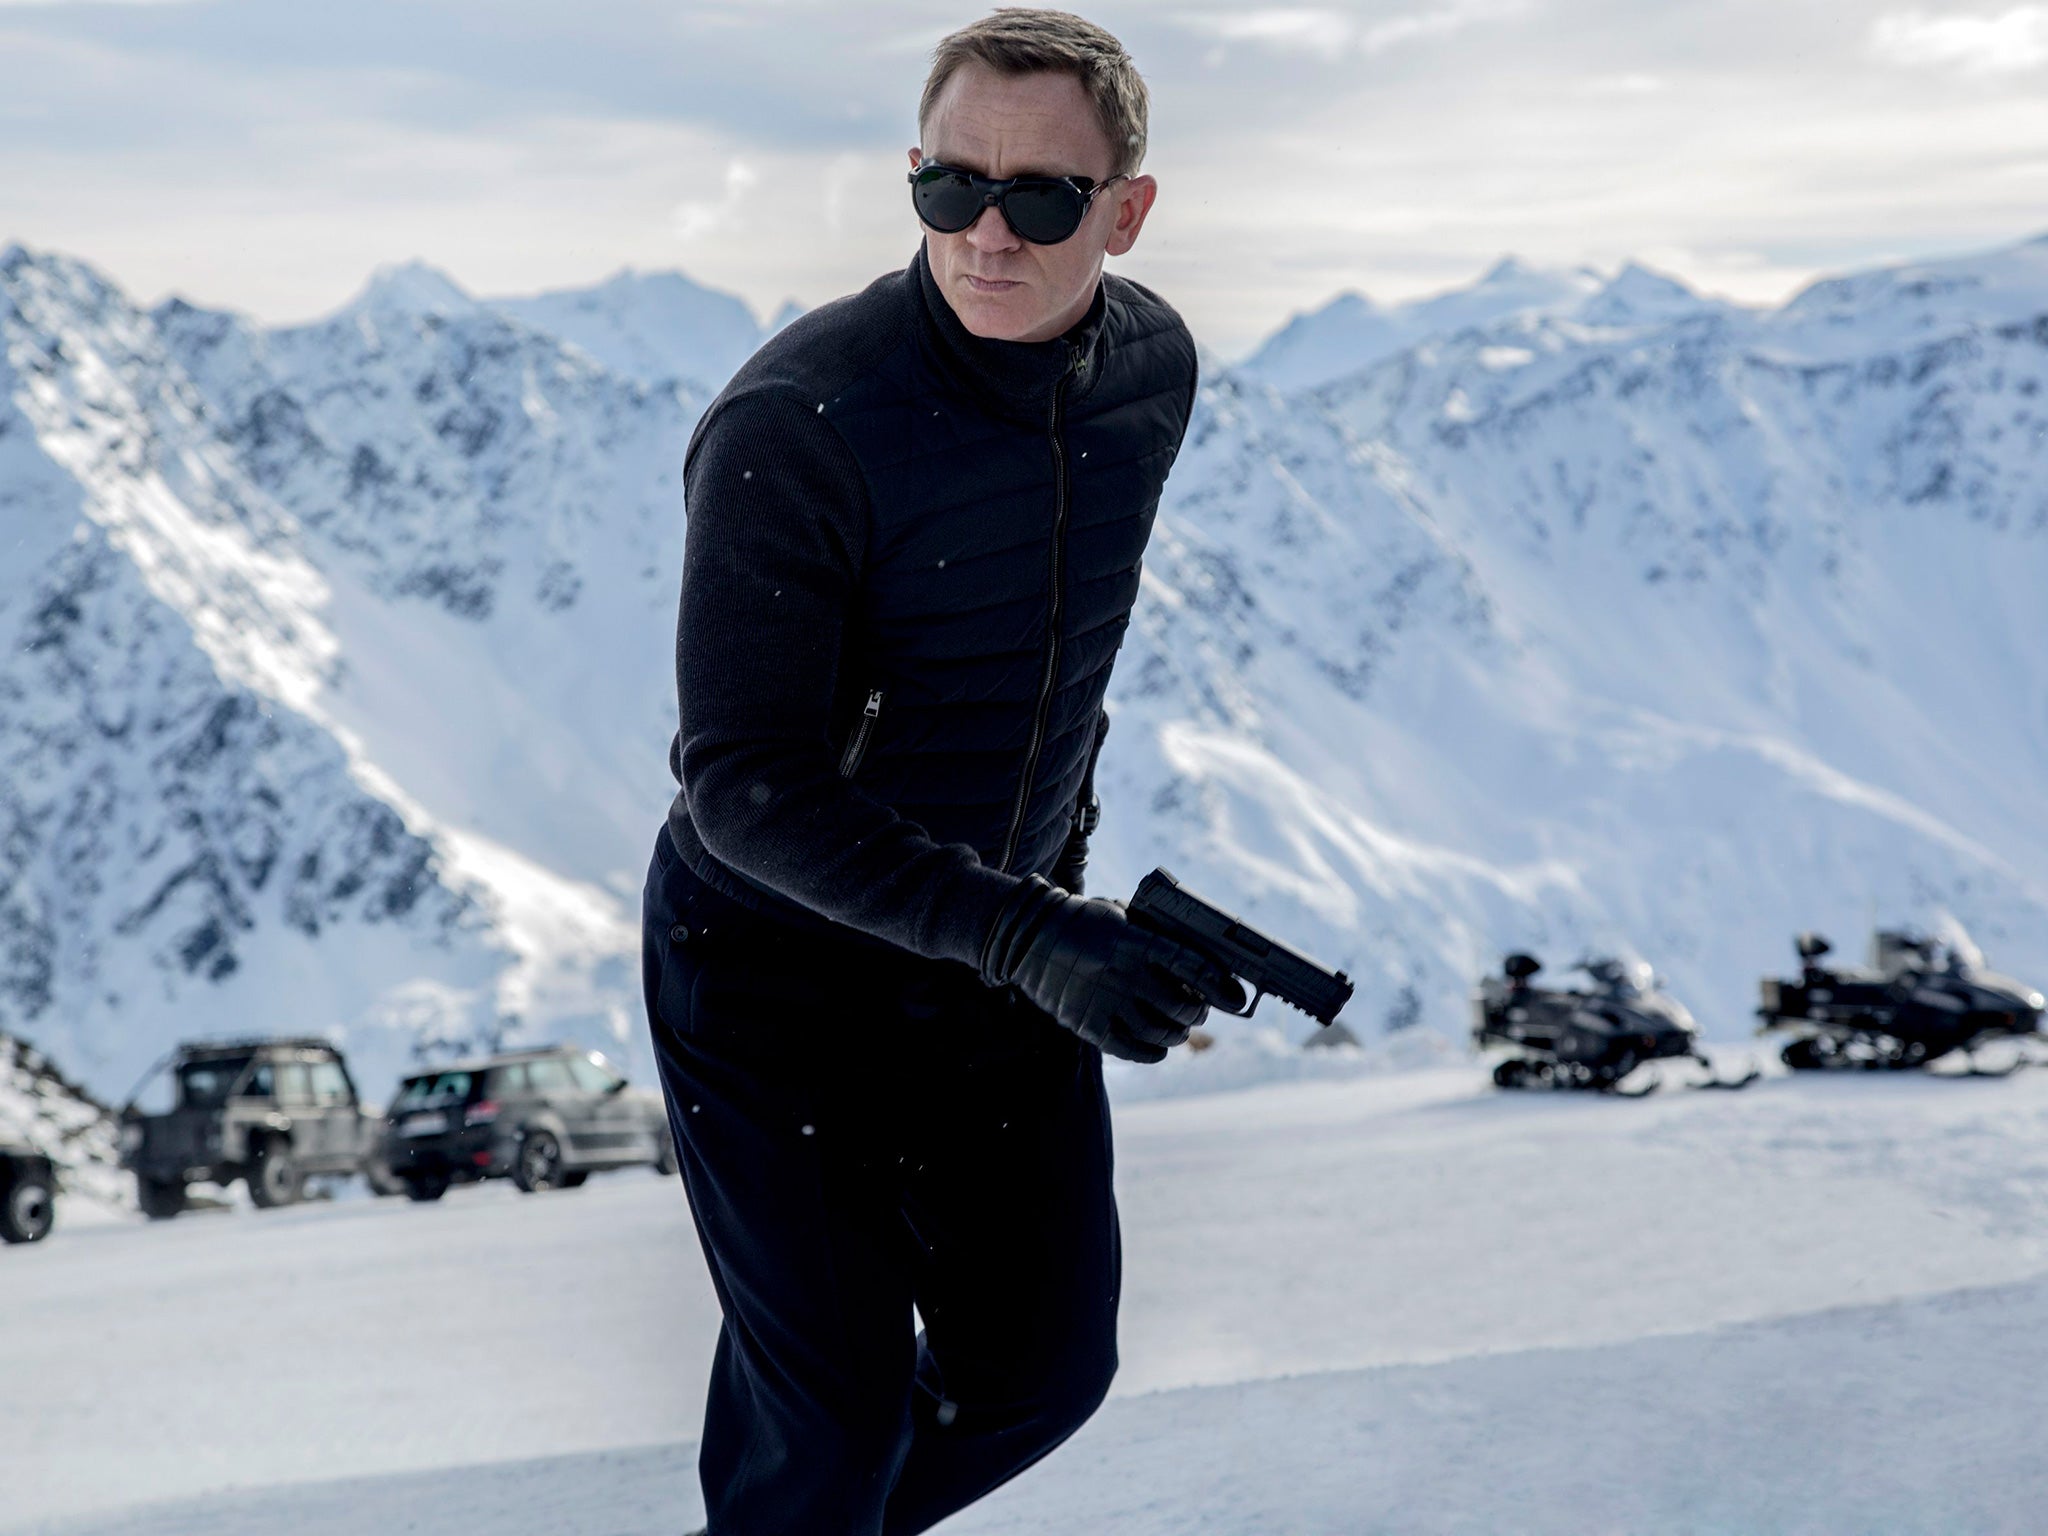 ‘No Time to Die’ will bring things full circle for Daniel Craig’s James Bond